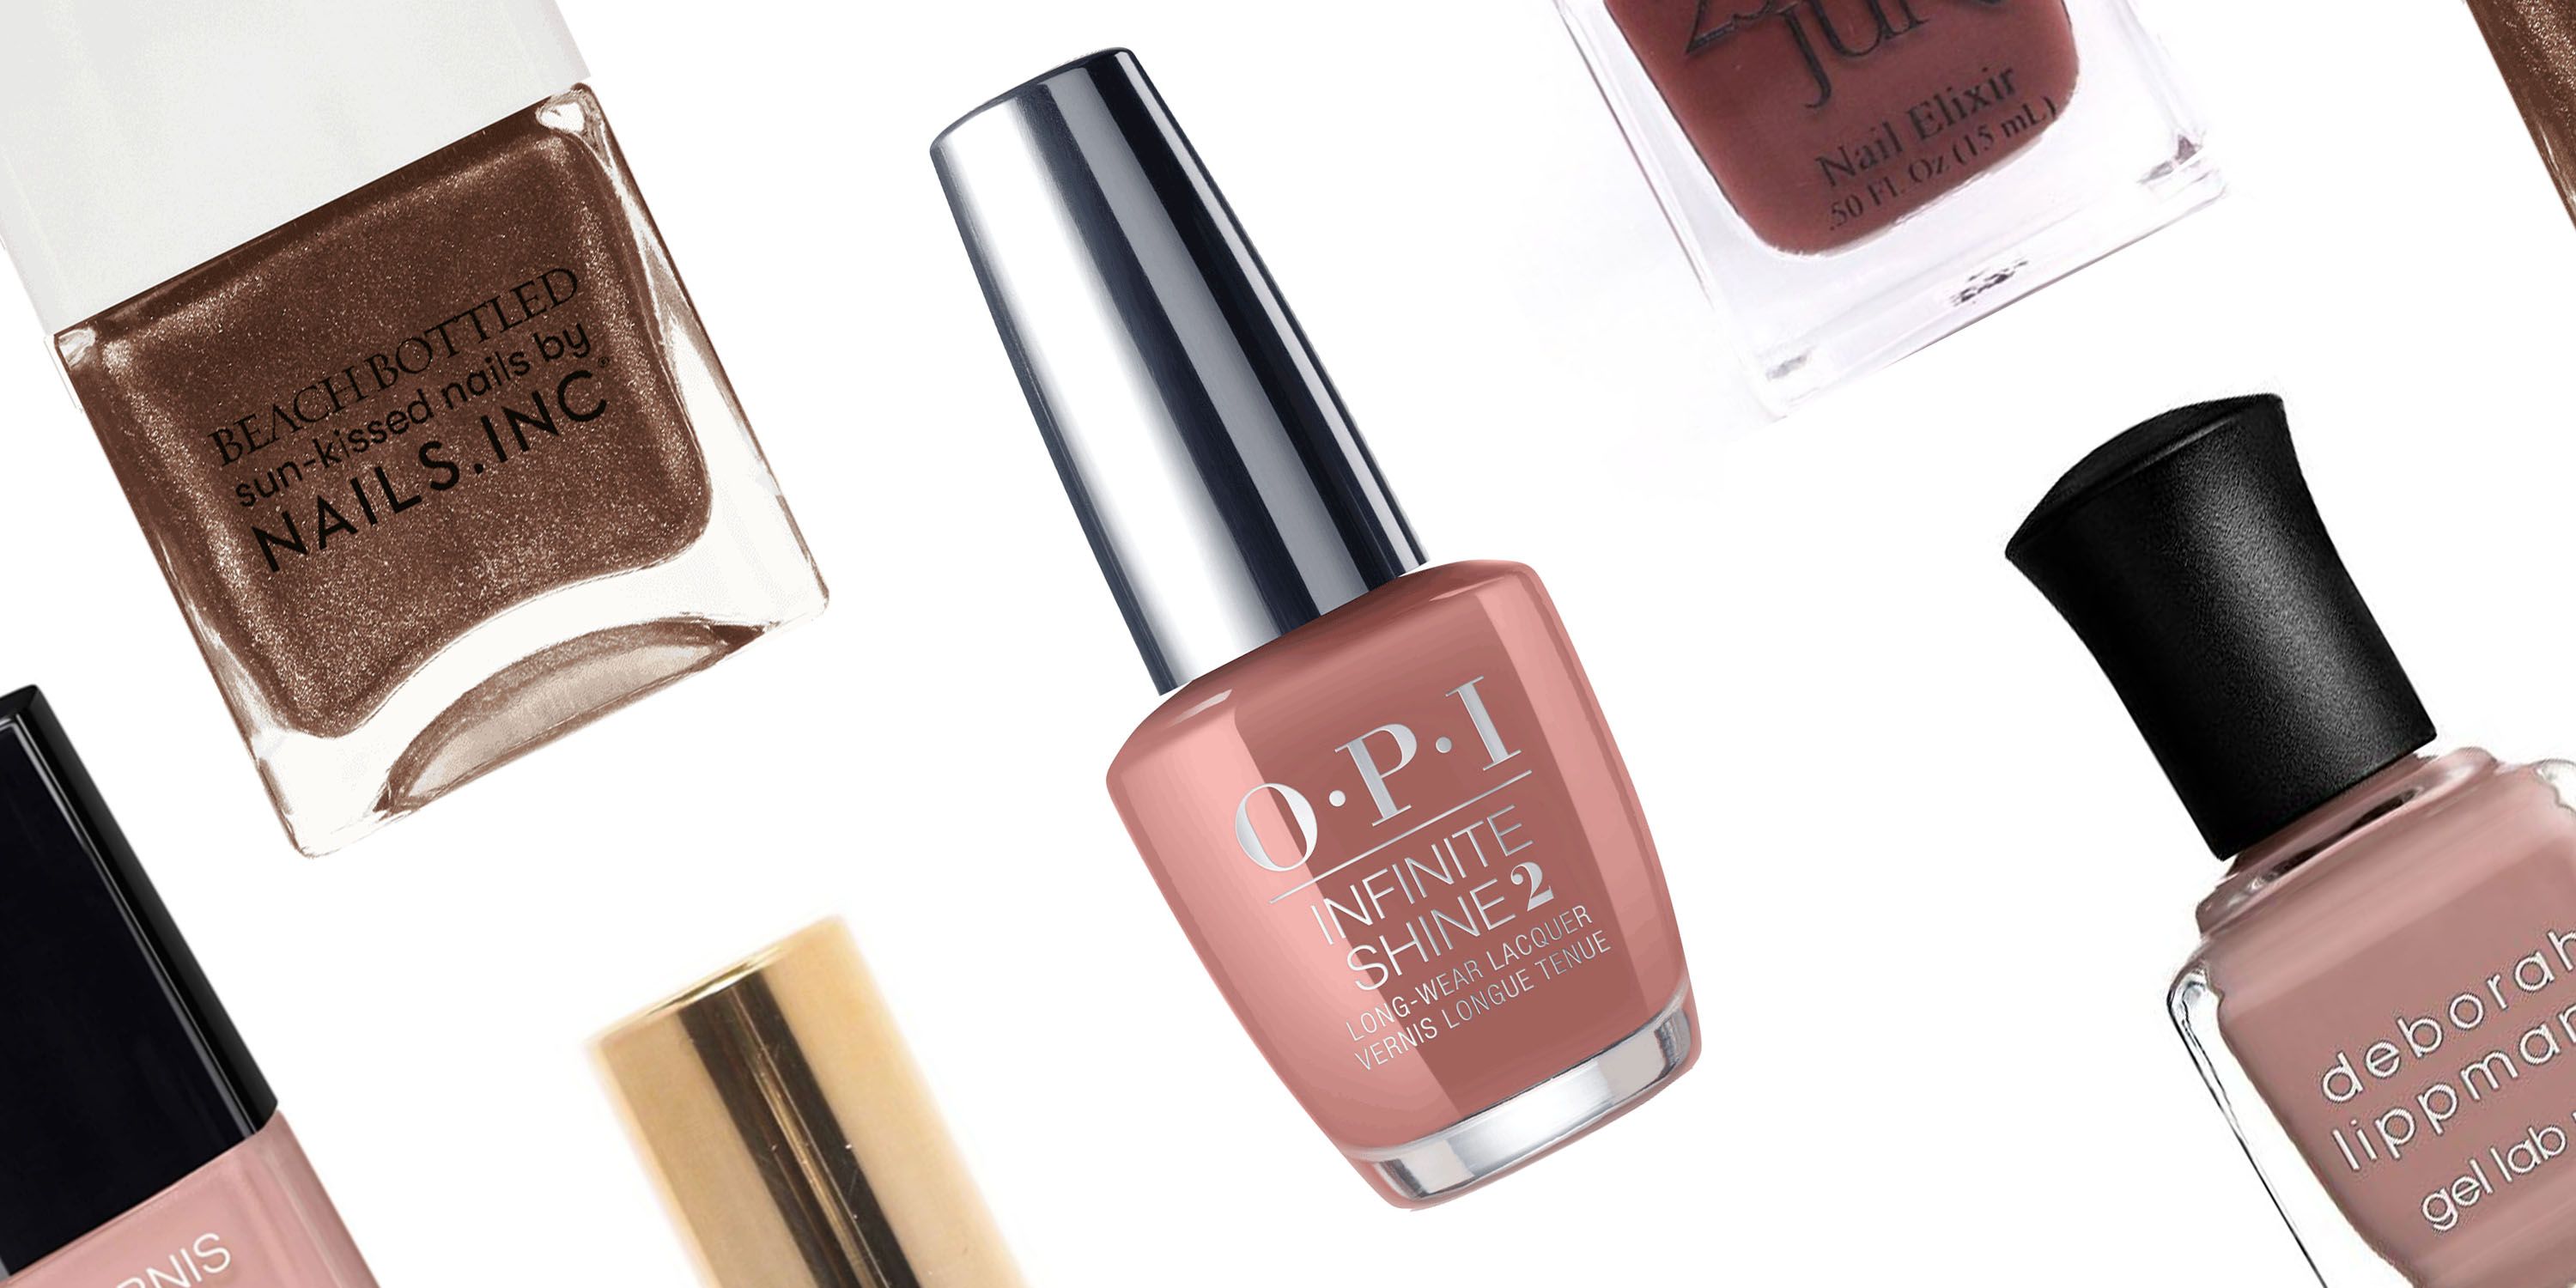 3. "The Perfect Nail Polish Shades for Your Skin Tone" - wide 6